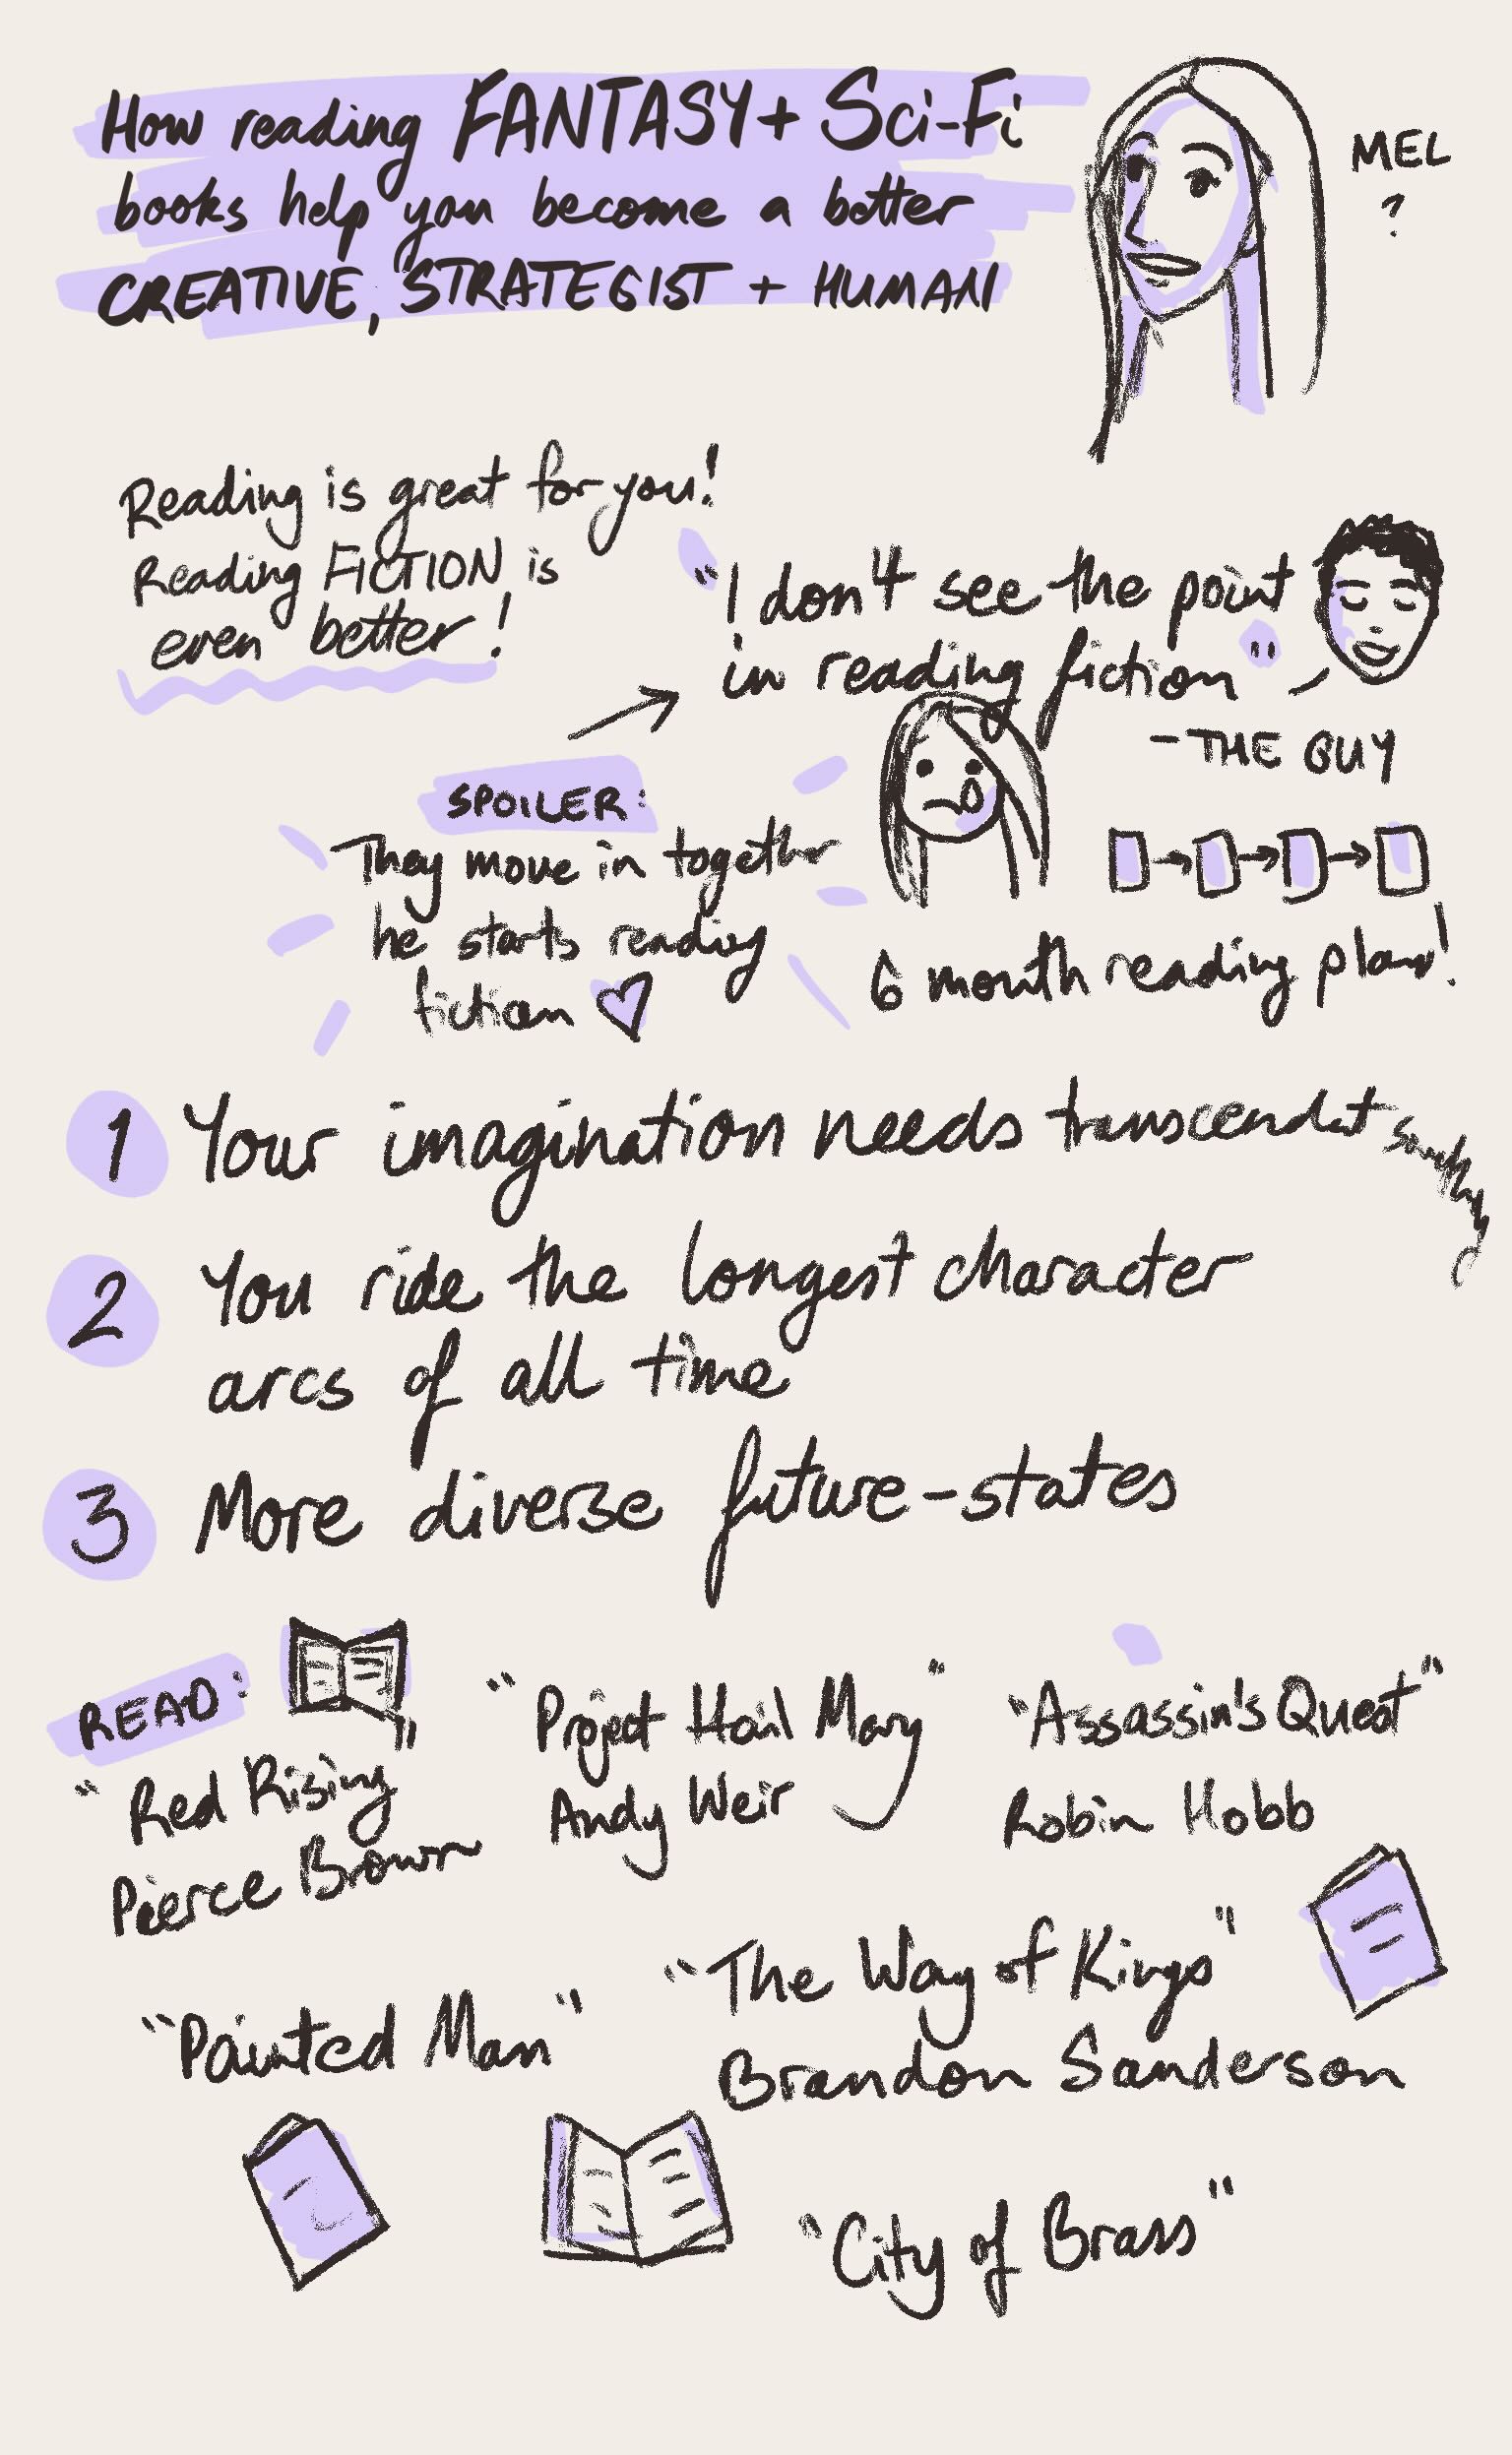 Sketchnote of How reading Fantasy & Sci-Fi books help you become better, Mel